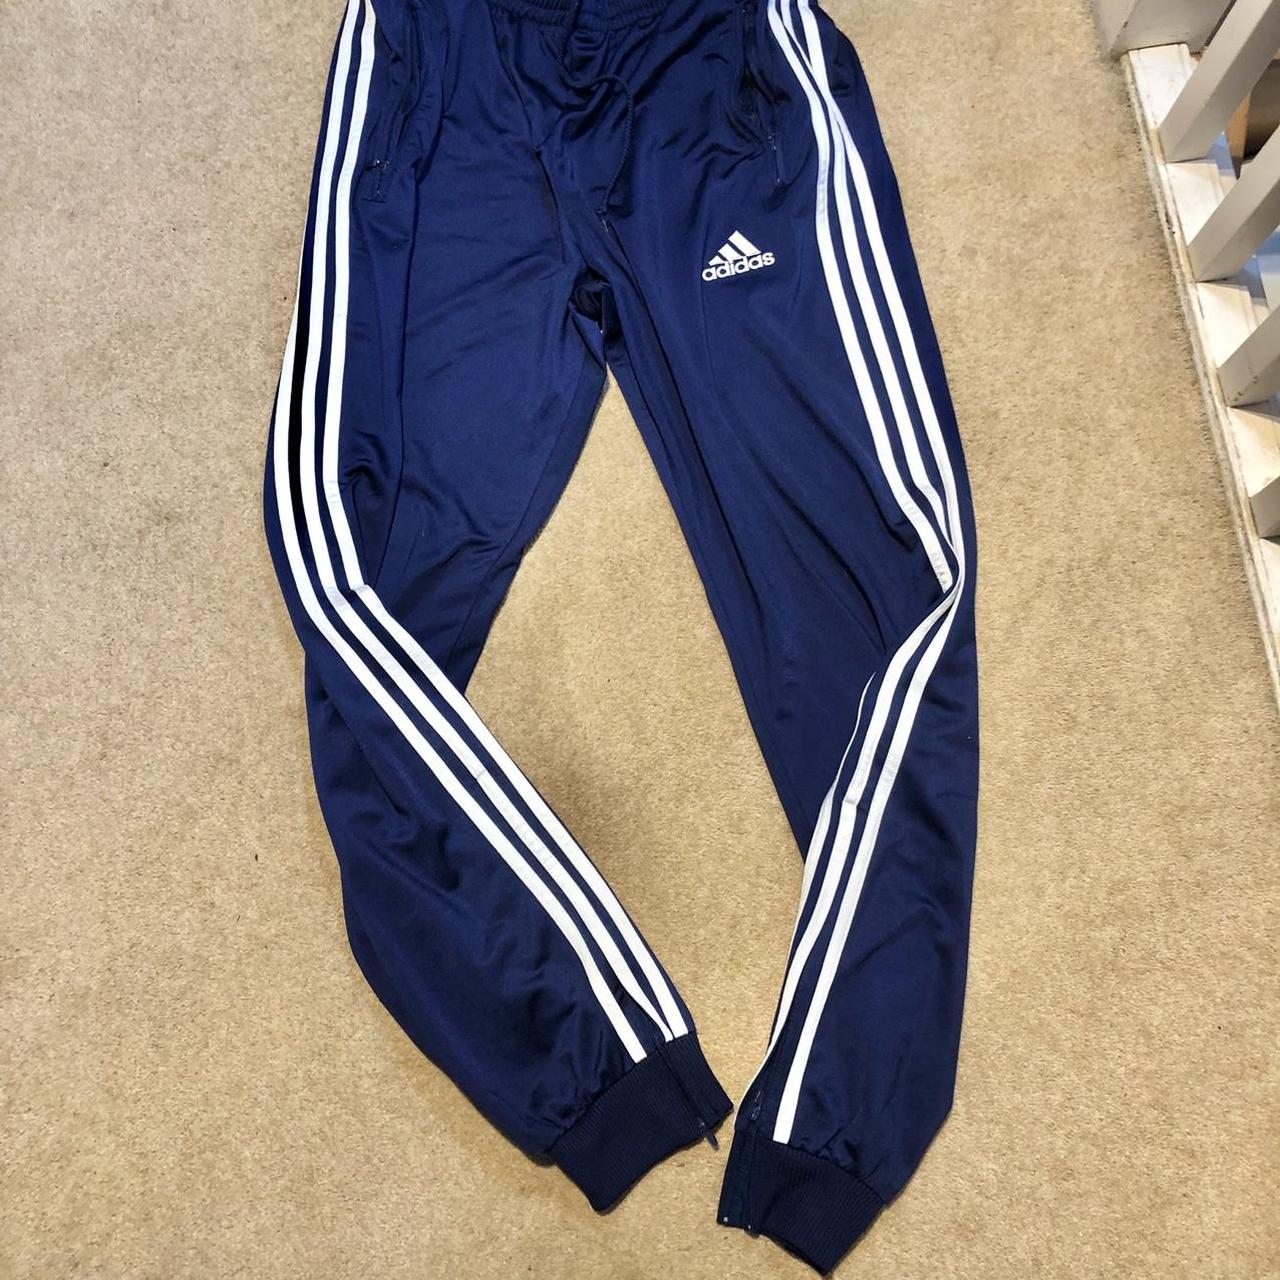 Adidas Men's White and Navy Joggers-tracksuits | Depop